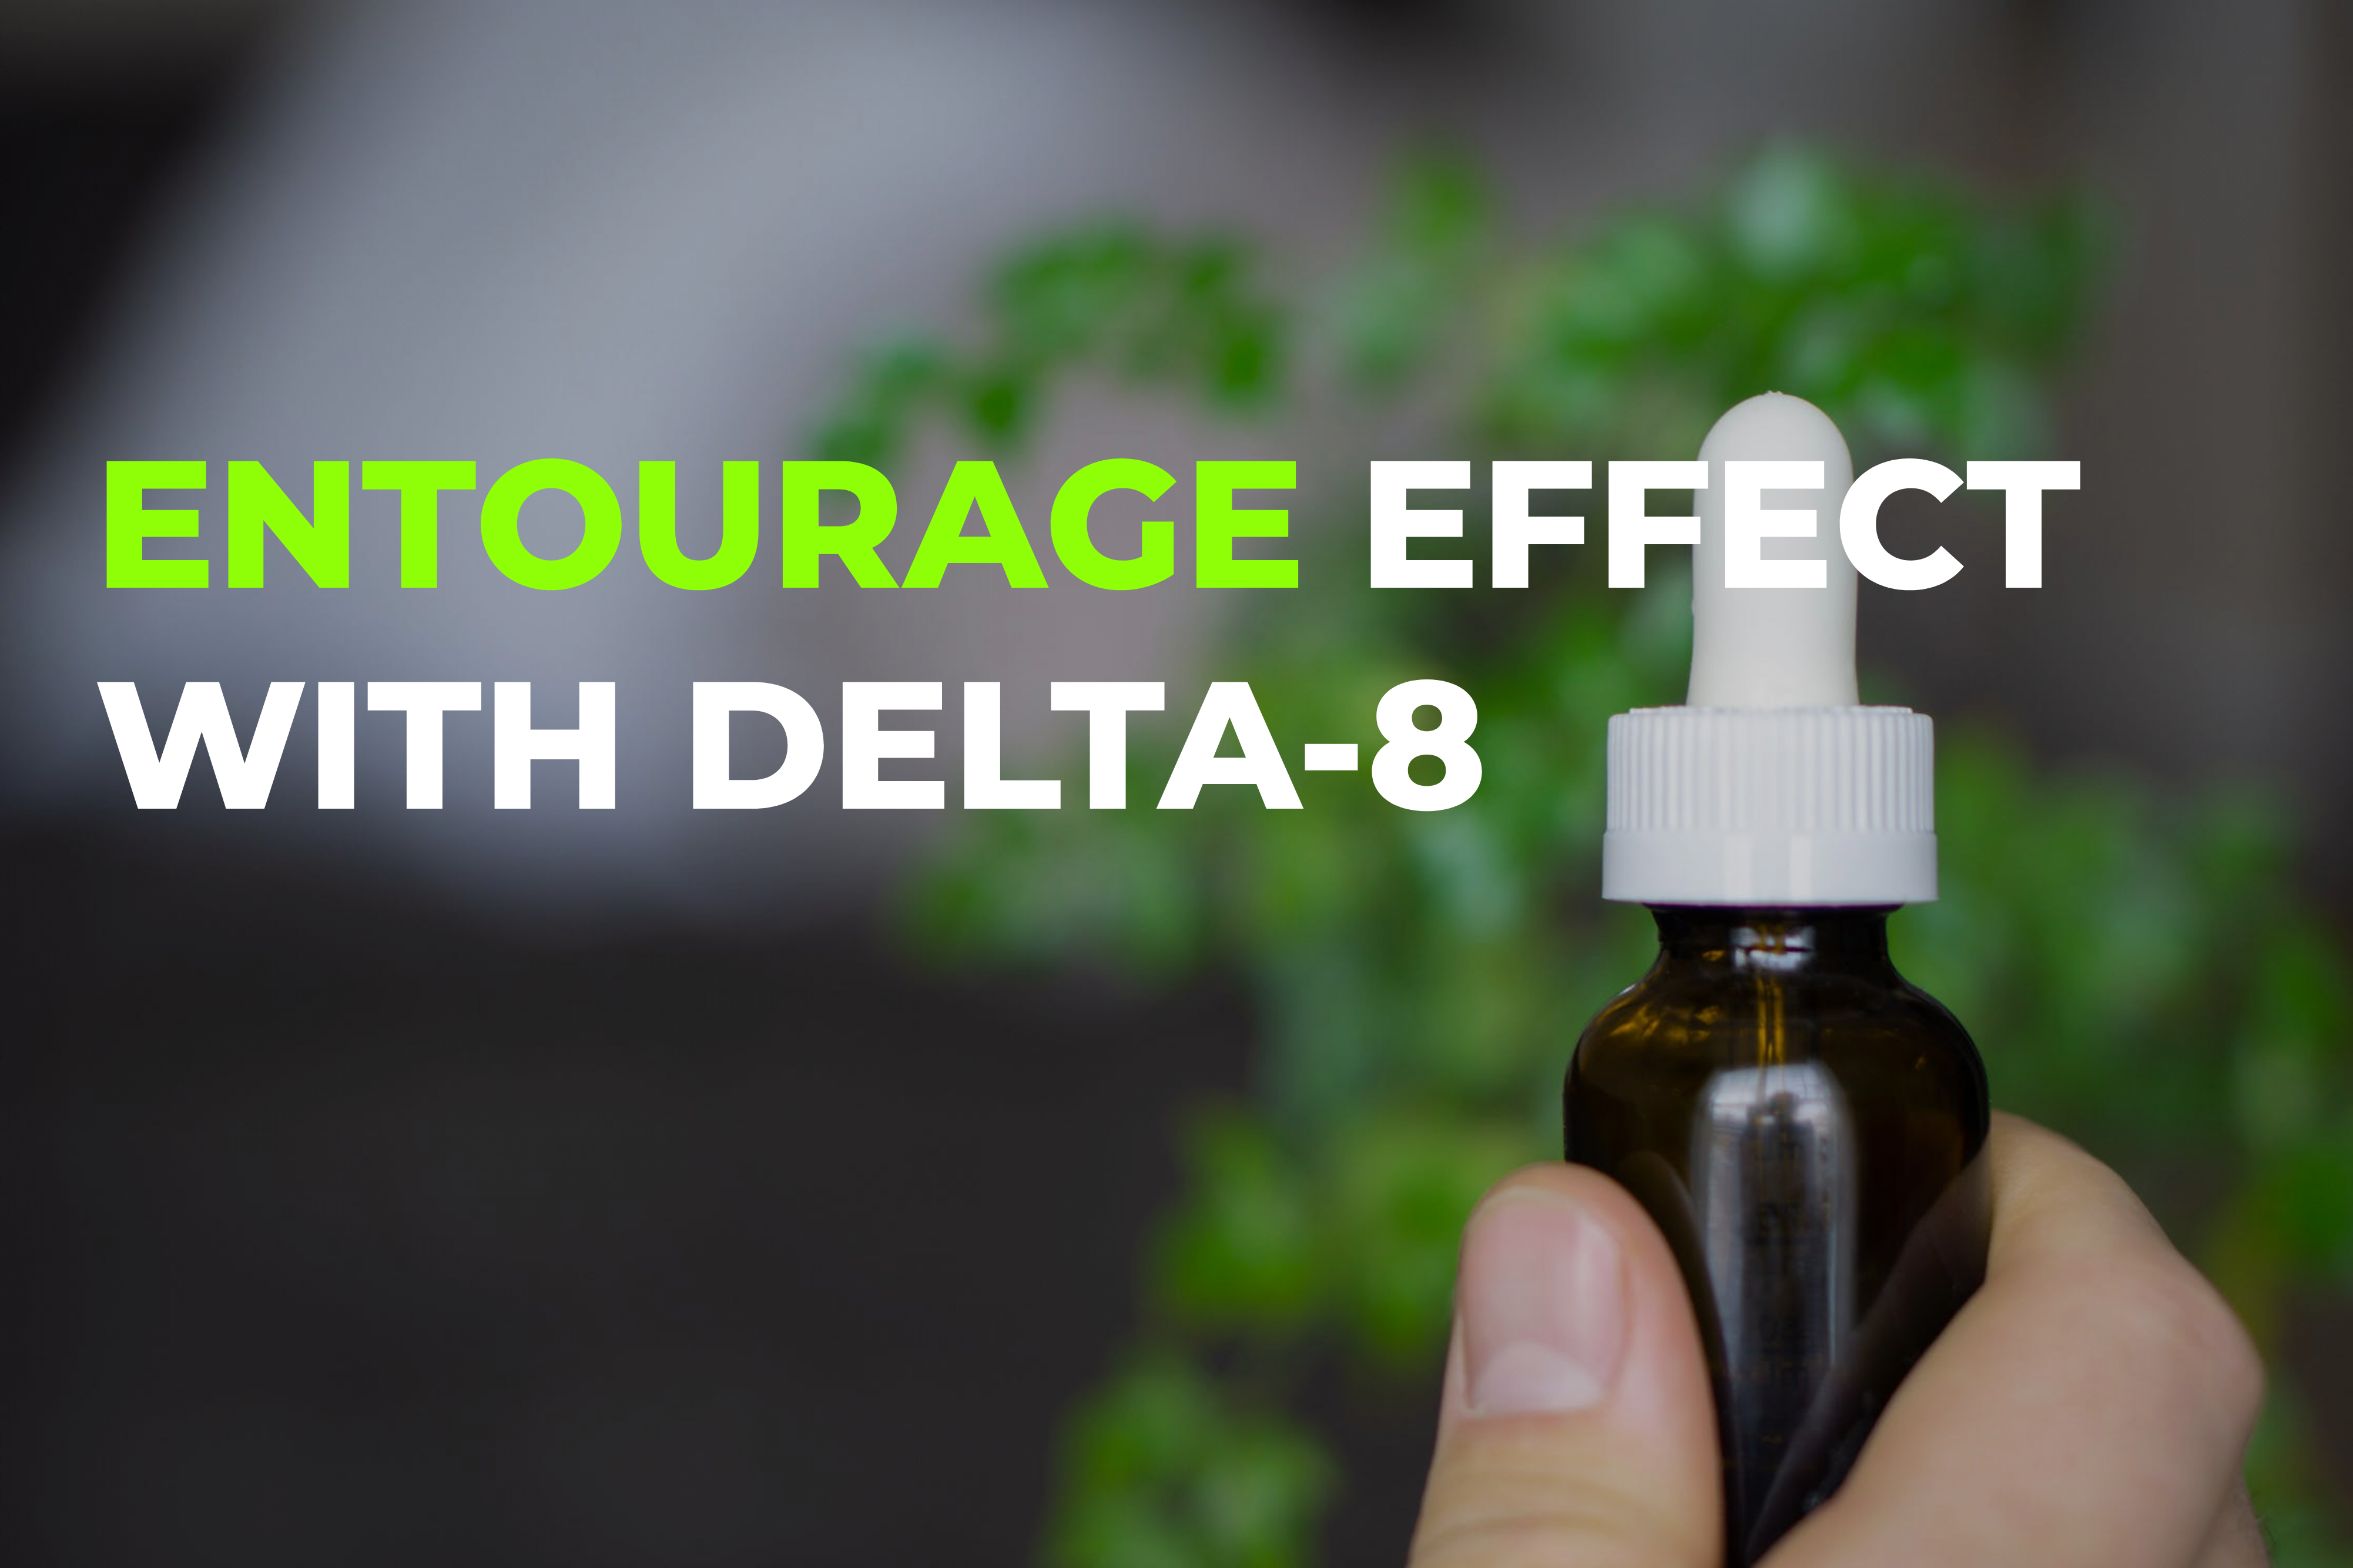 What Is Entourage Effect? Does Delta 8 Help In Achieving It? - BudPop